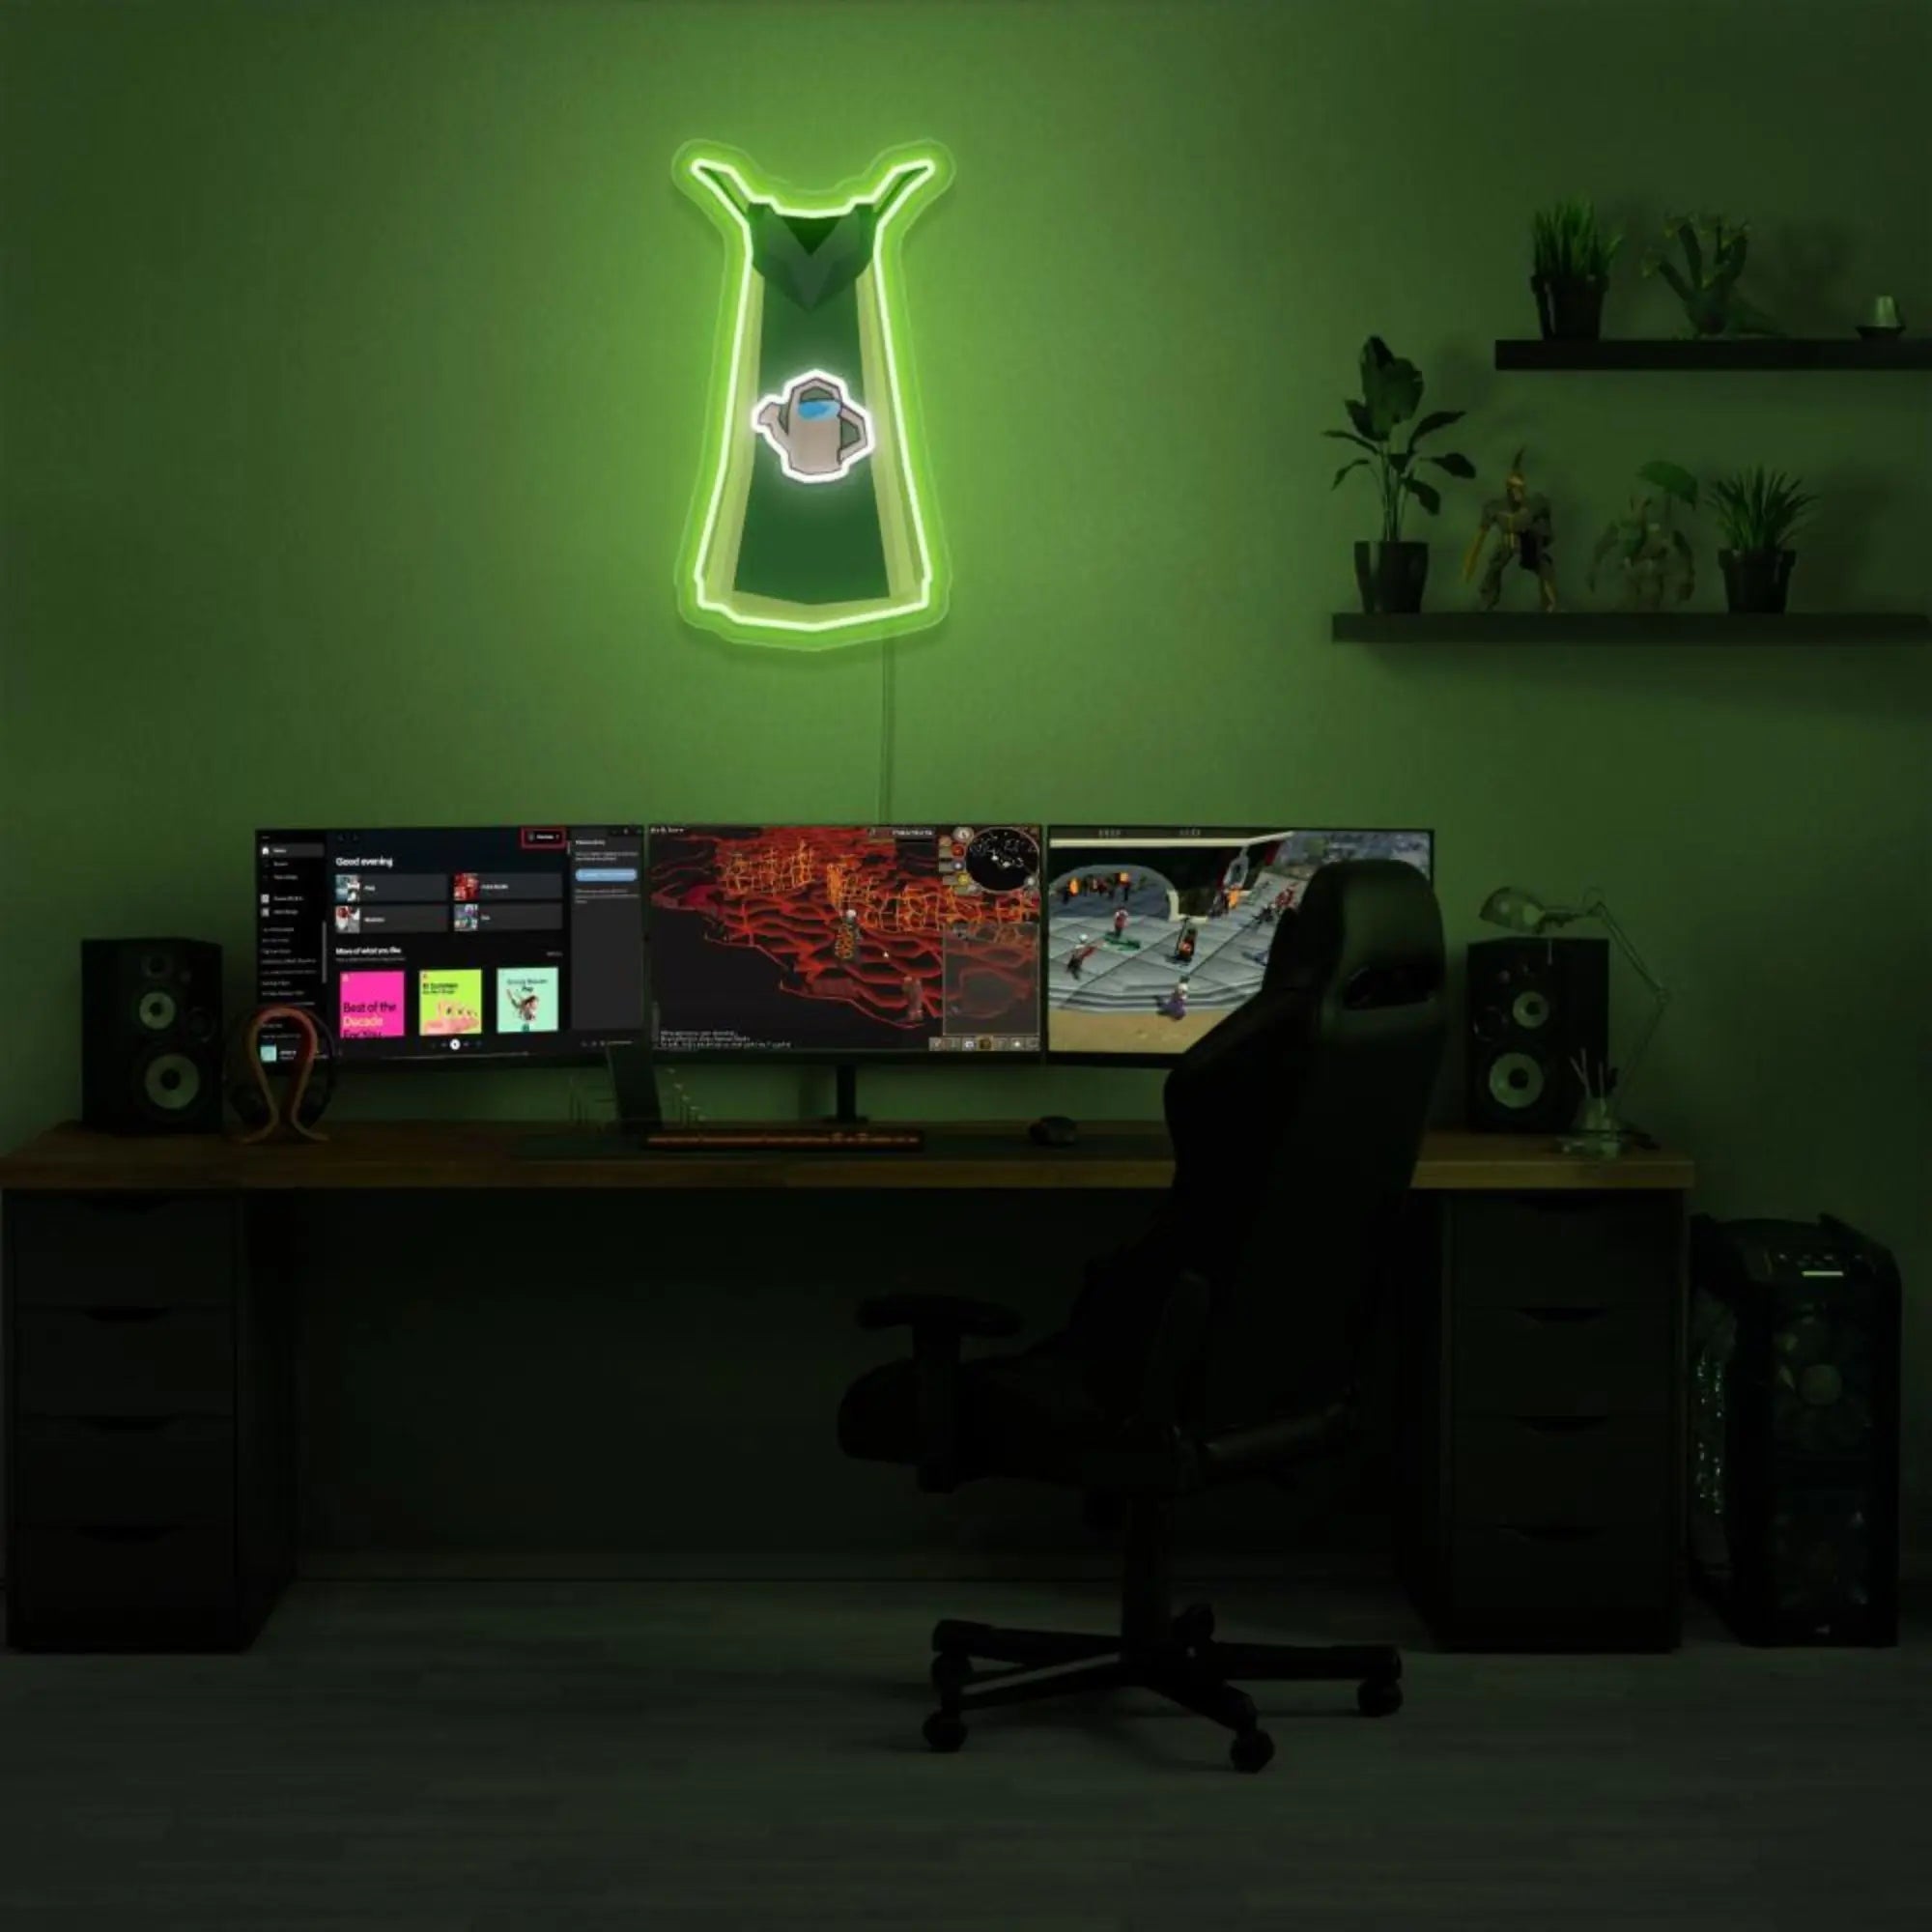 Illuminate your gaming setup with the Runescape Farming Skillcape LED neon sign mounted above a gaming PC. Featuring the iconic farming skill symbol, this LED neon sign adds a touch of agricultural charm to your gaming environment, reminiscent of harvesting crops in RuneScape. A unique gift for Runescape enthusiasts. 